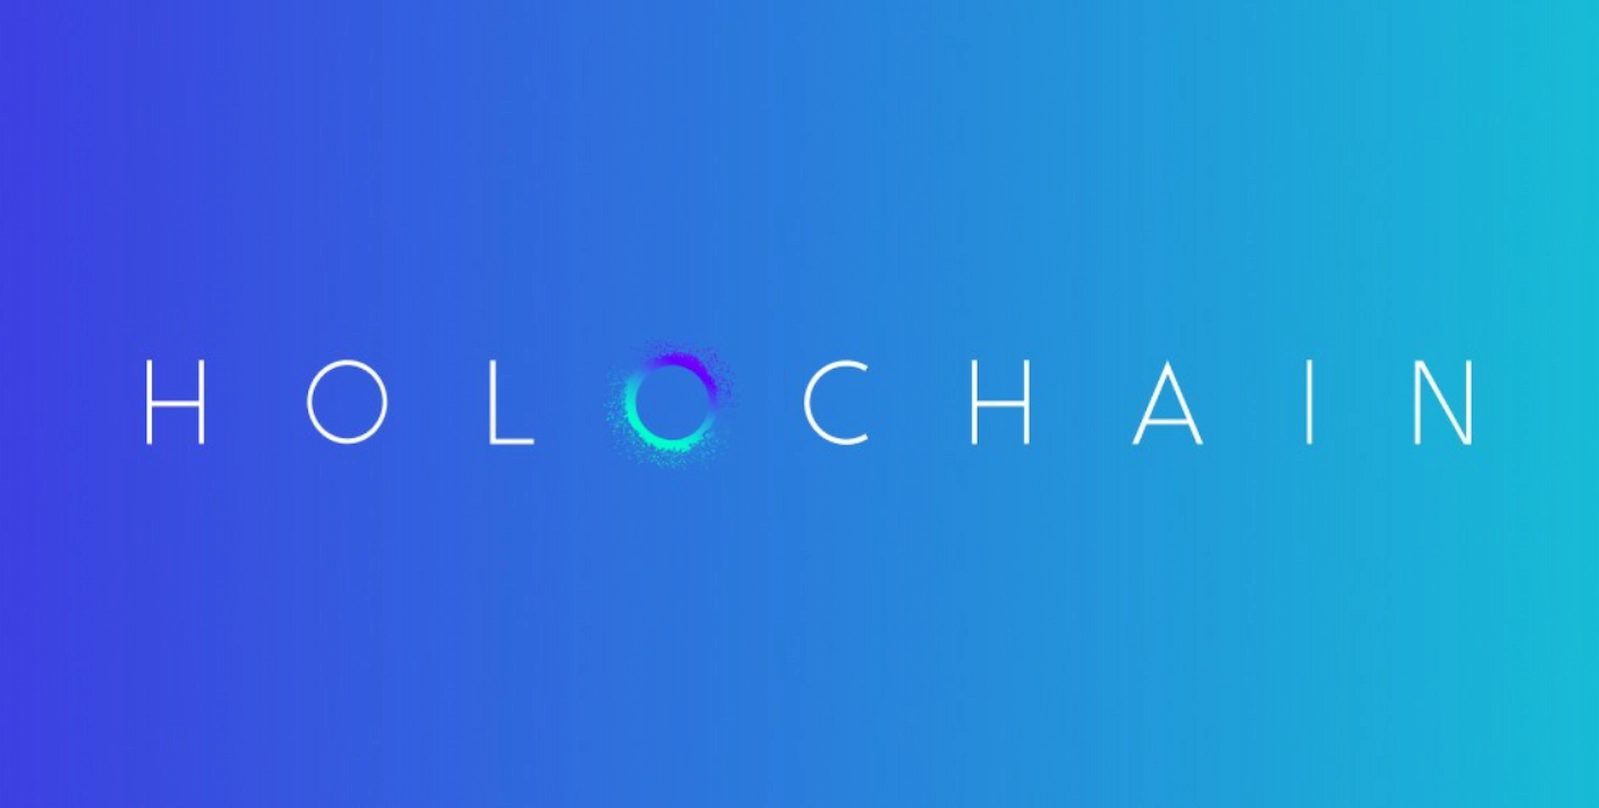 Holochain native token HOT spiked over 30% week to day